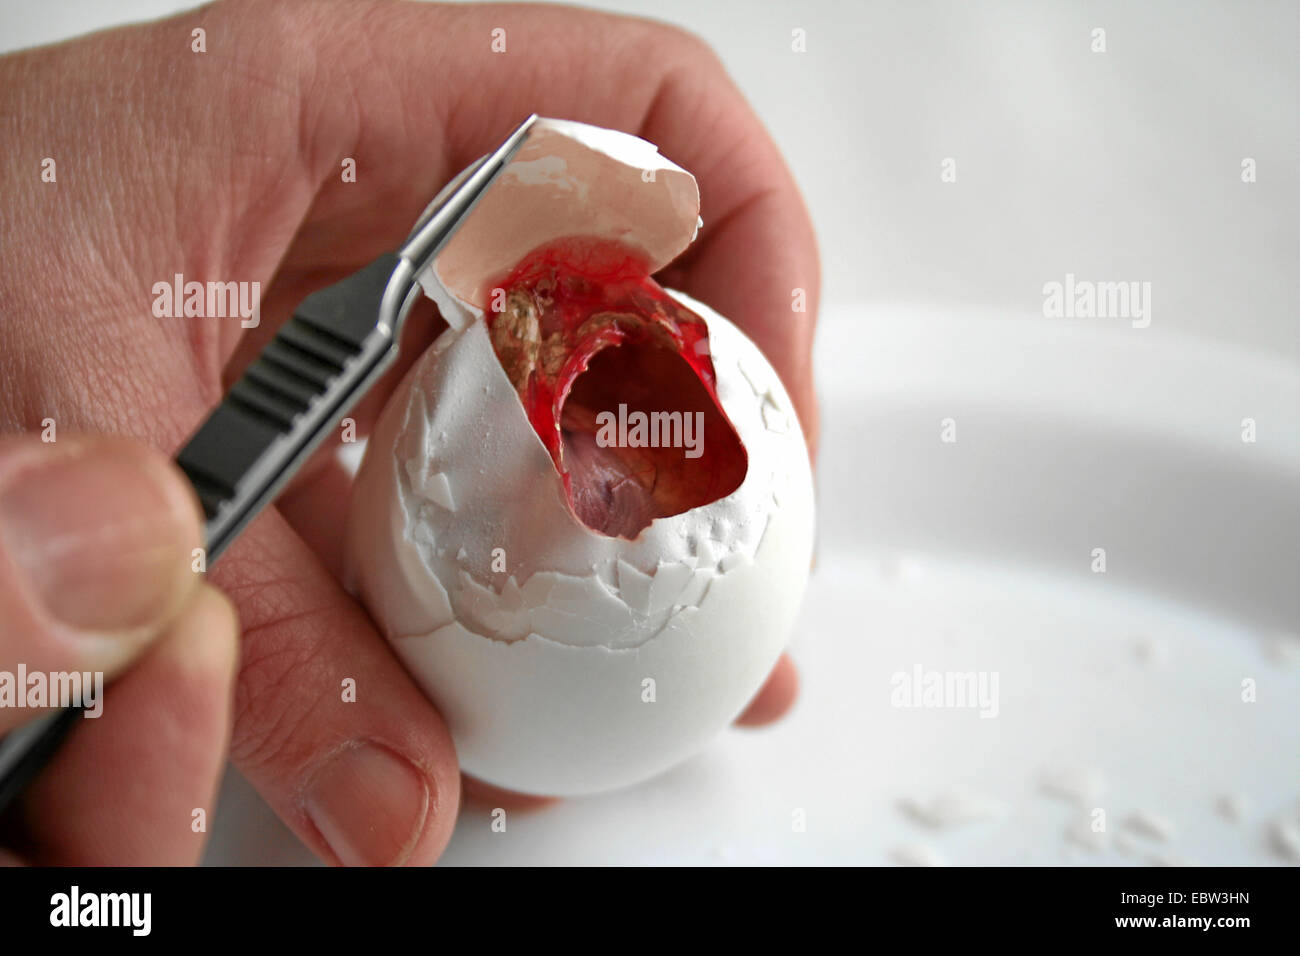 fertilized duck's egg called balut, being eaten in the Far East as delicacy and supposed aphrodisiac, is opened with a pair of pincers Stock Photo